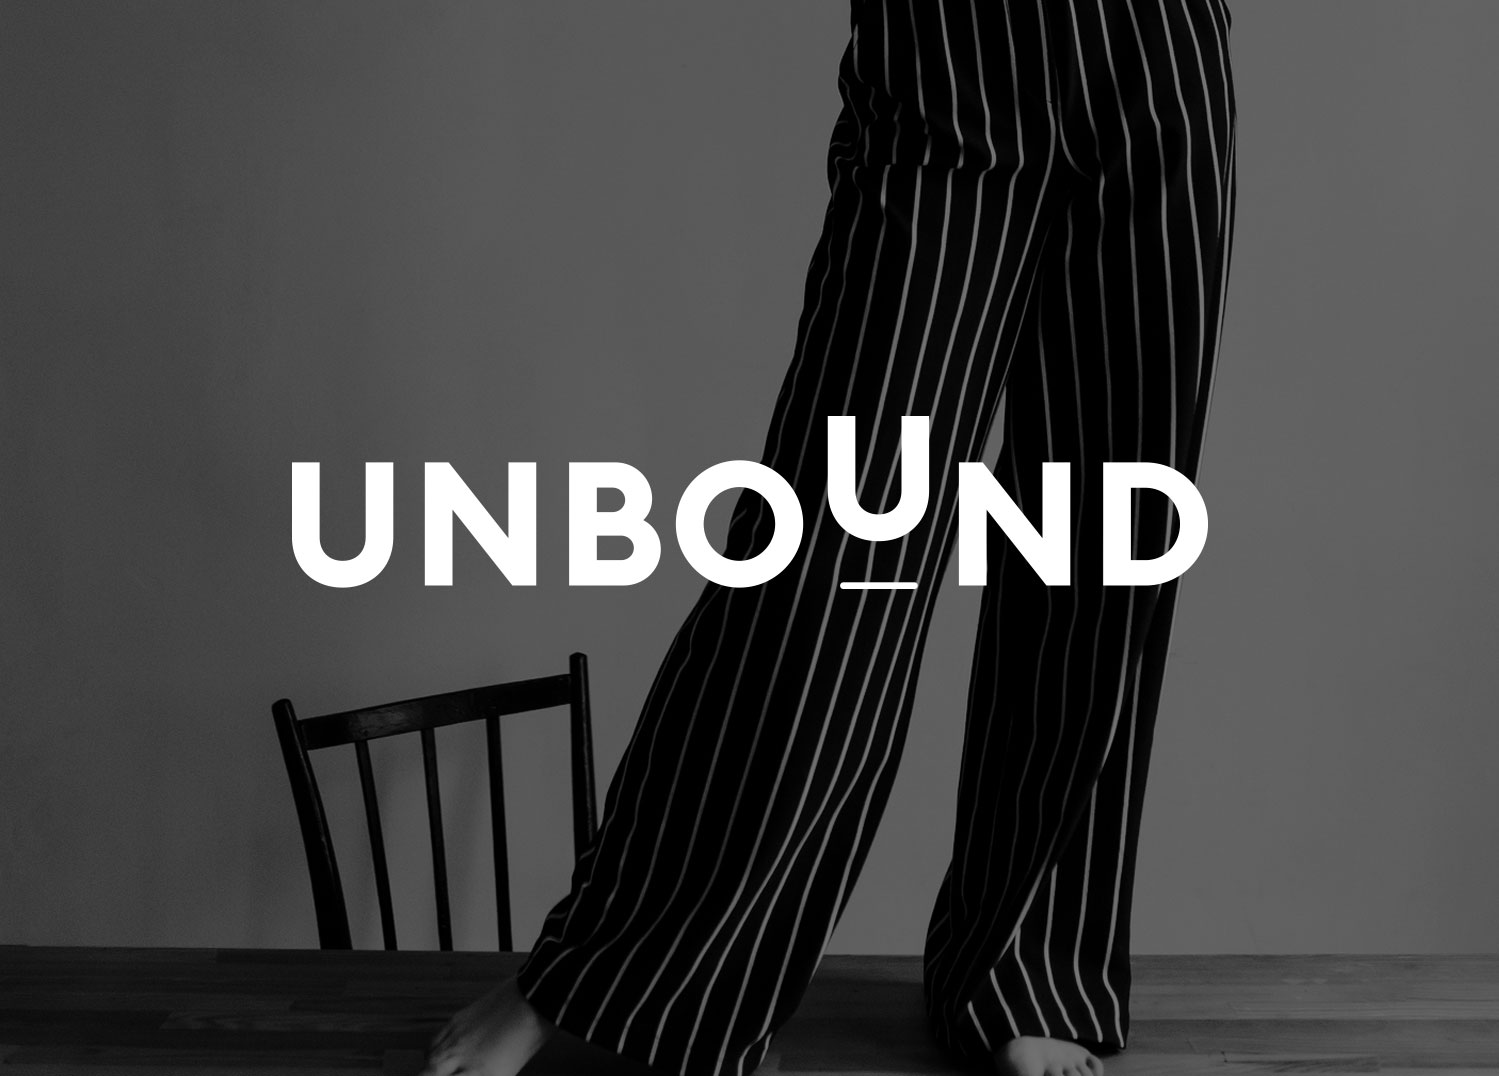 Unbound raises over £3 million to support its plans